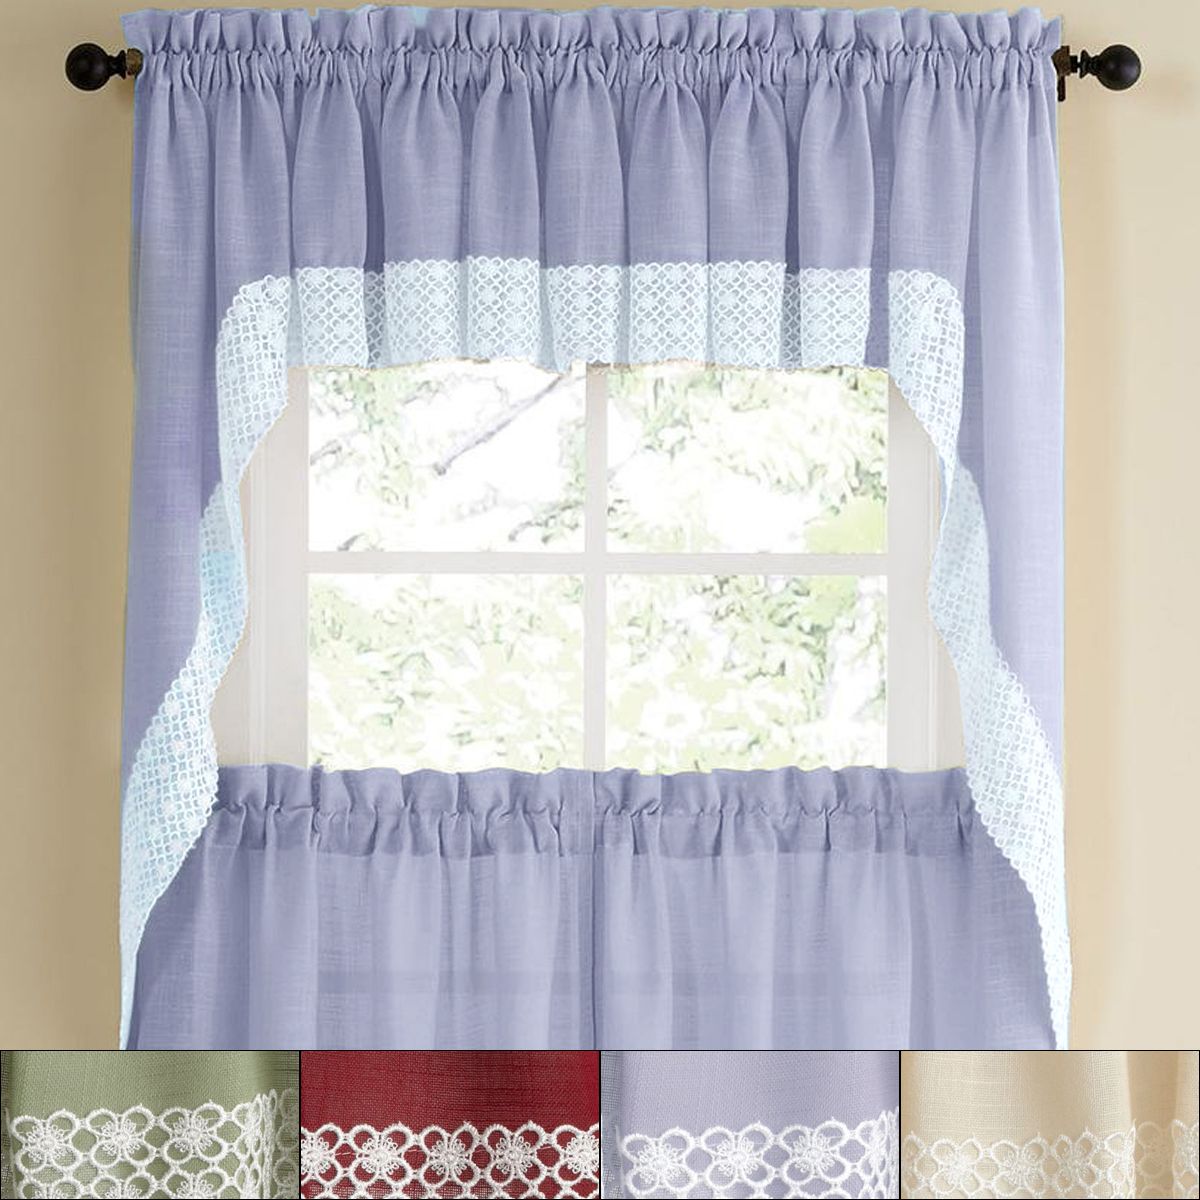 Details About Salem Kitchen Window Curtain W/ Lace Trim – 38" Swag Pair With Regard To Ivory Knit Lace Bird Motif Window Curtain (Photo 17 of 20)